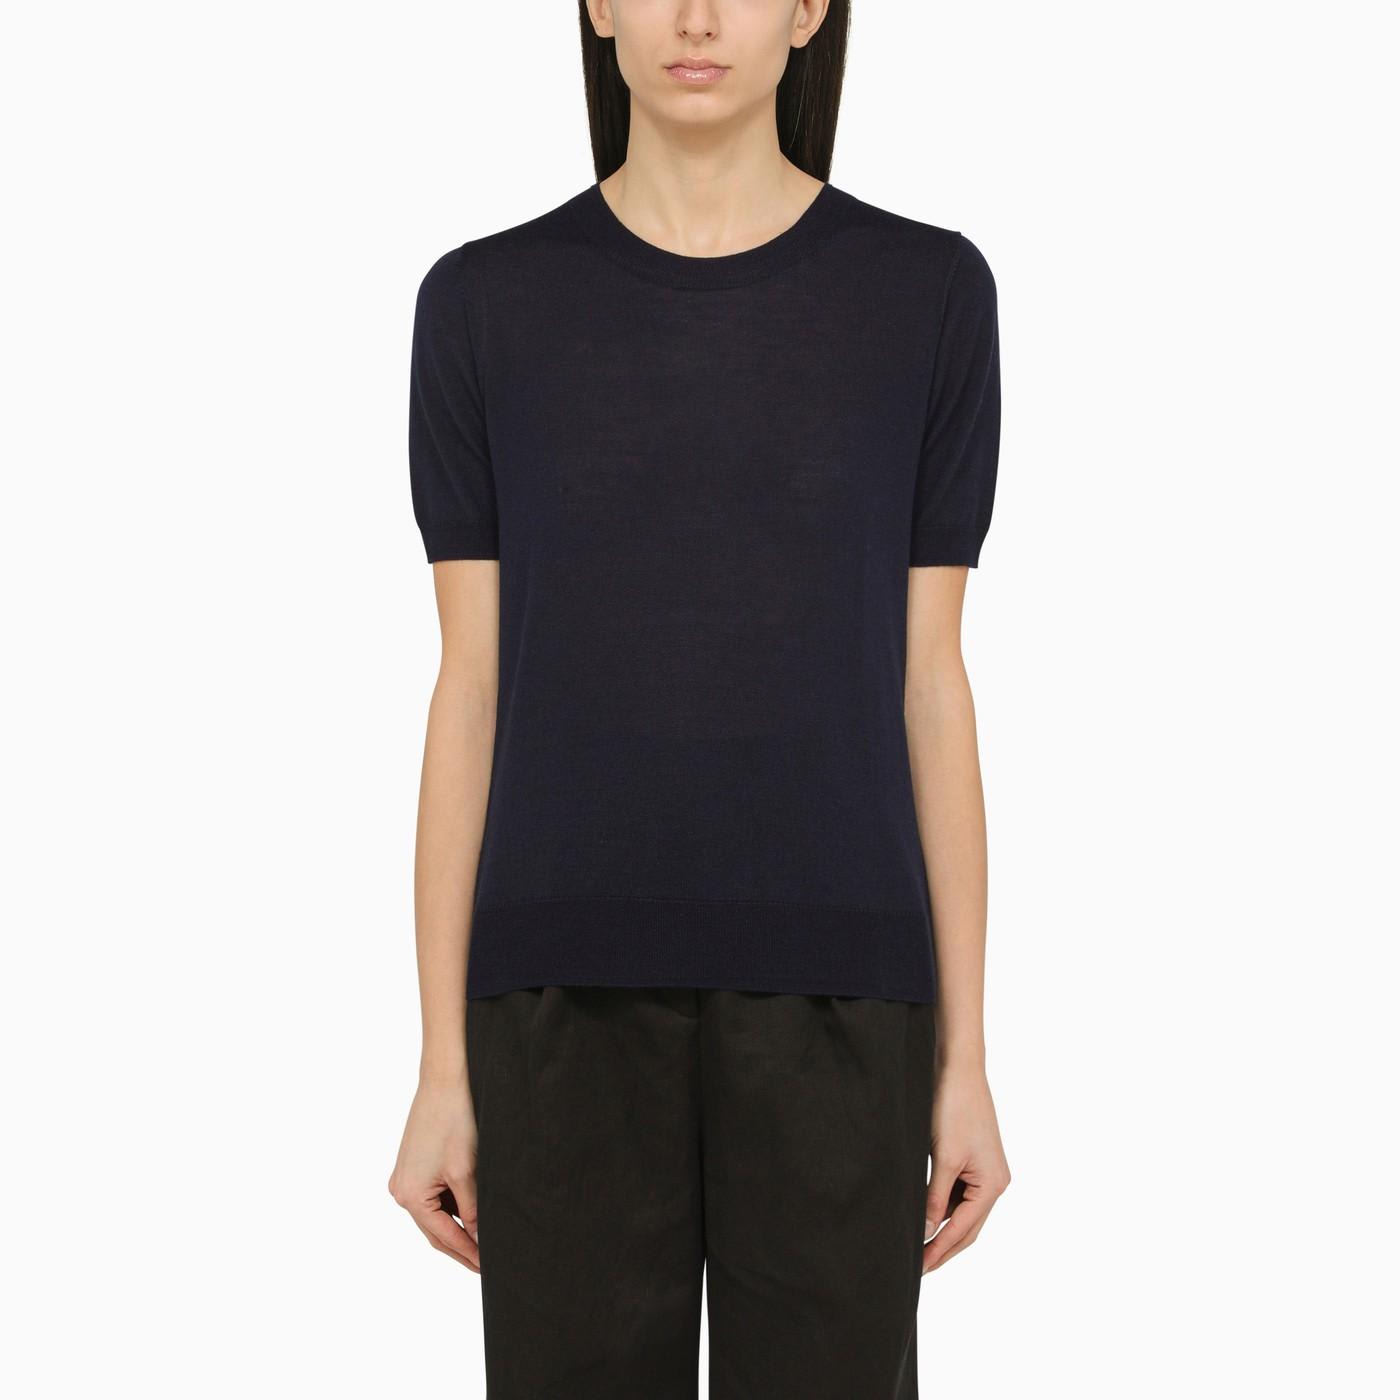 P.A.R.O.S.H BLUE WOOL AND CASHMERE SHORT-SLEEVED TOP